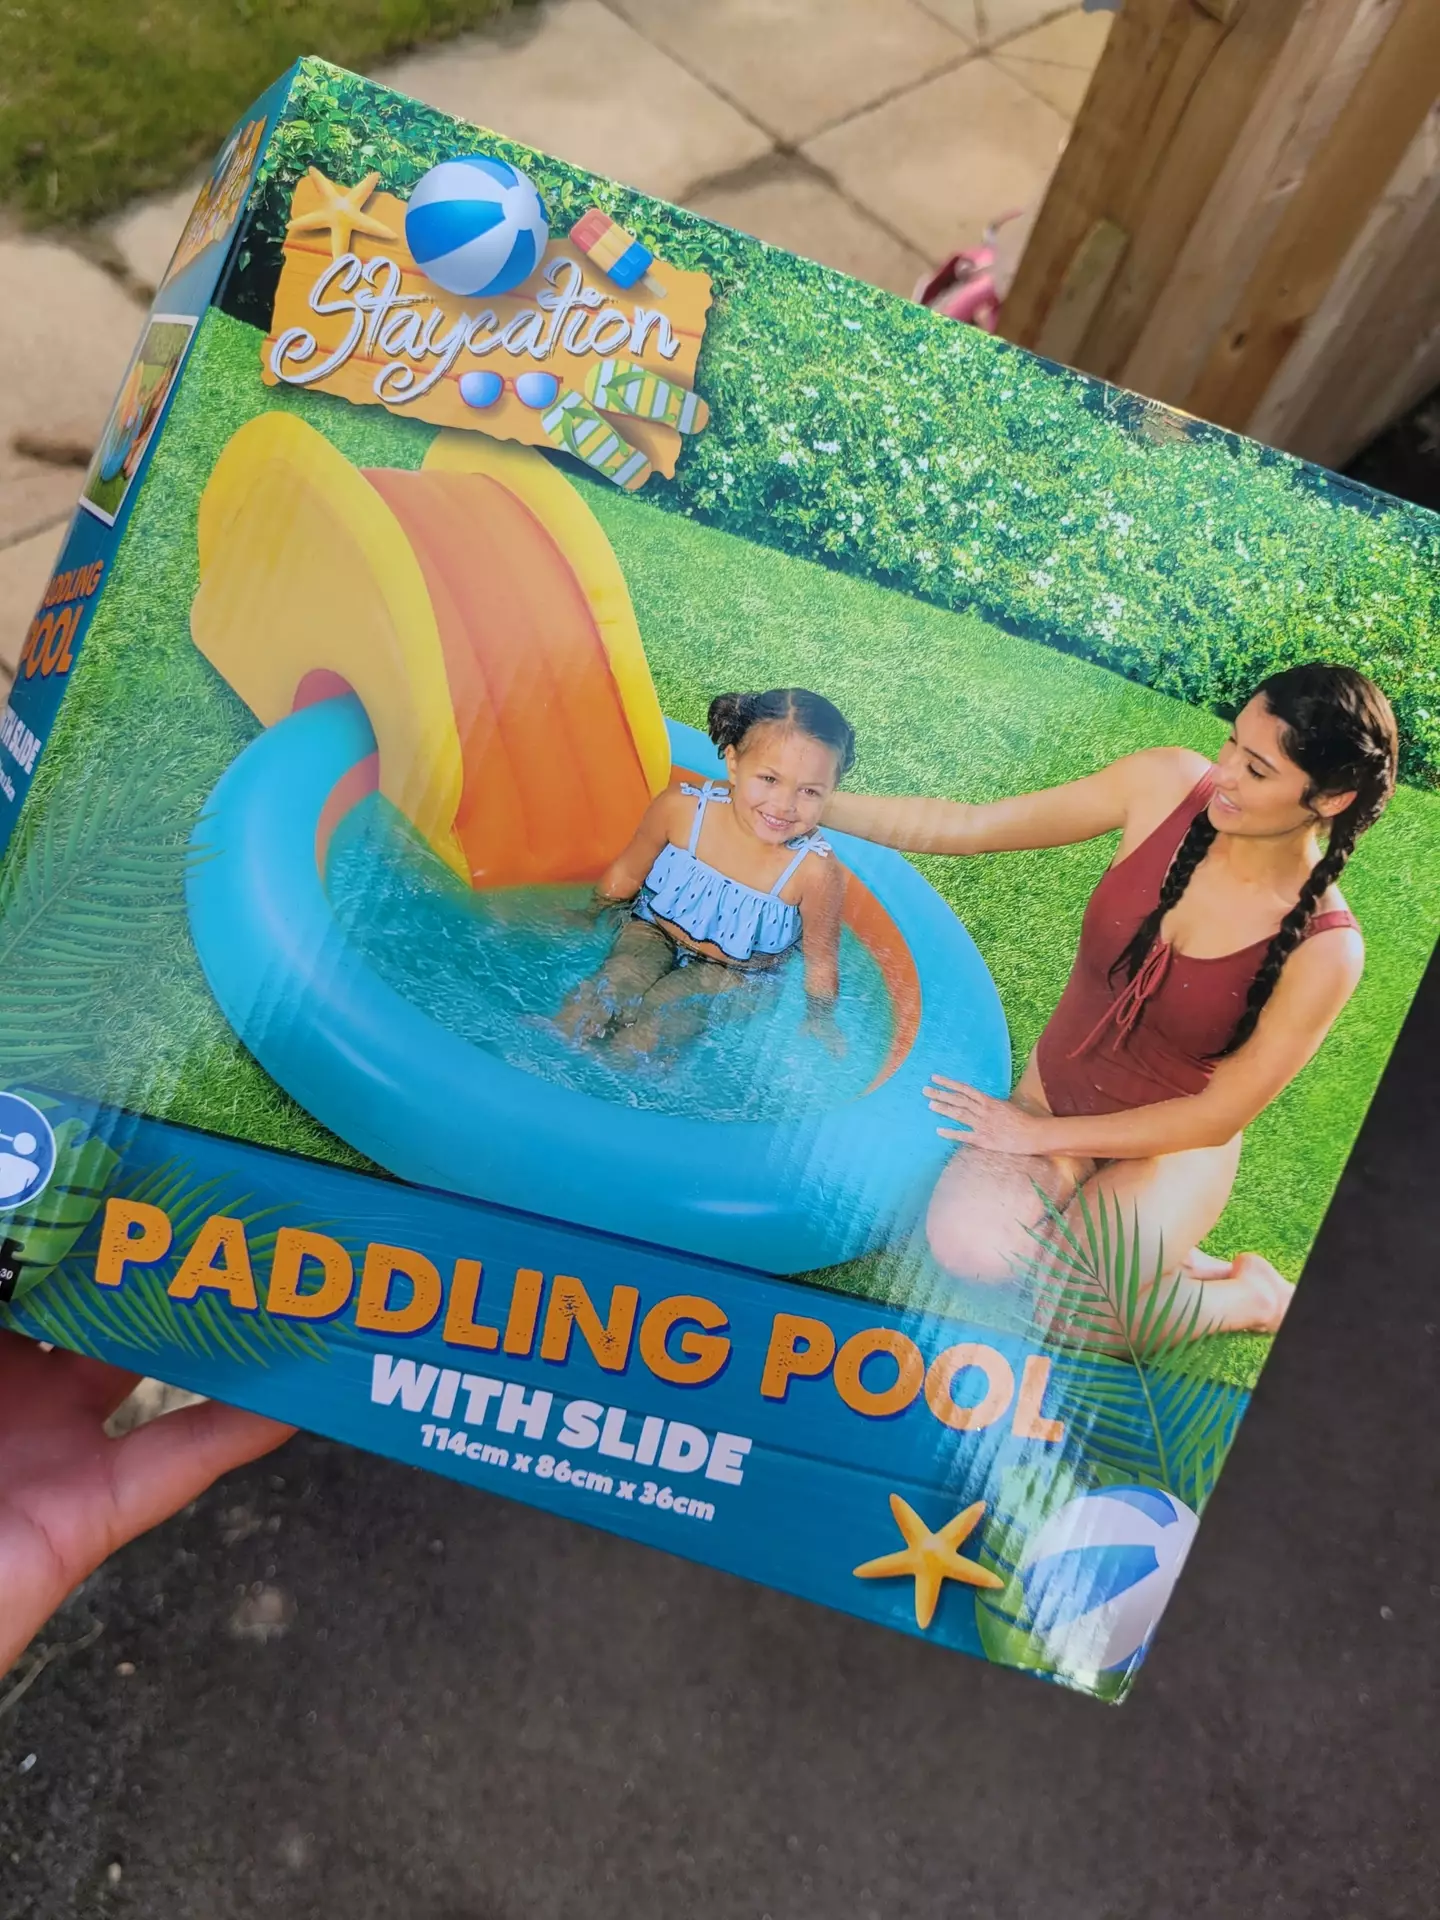 The Staycation Paddling Pool With Slide on sale for just £15.